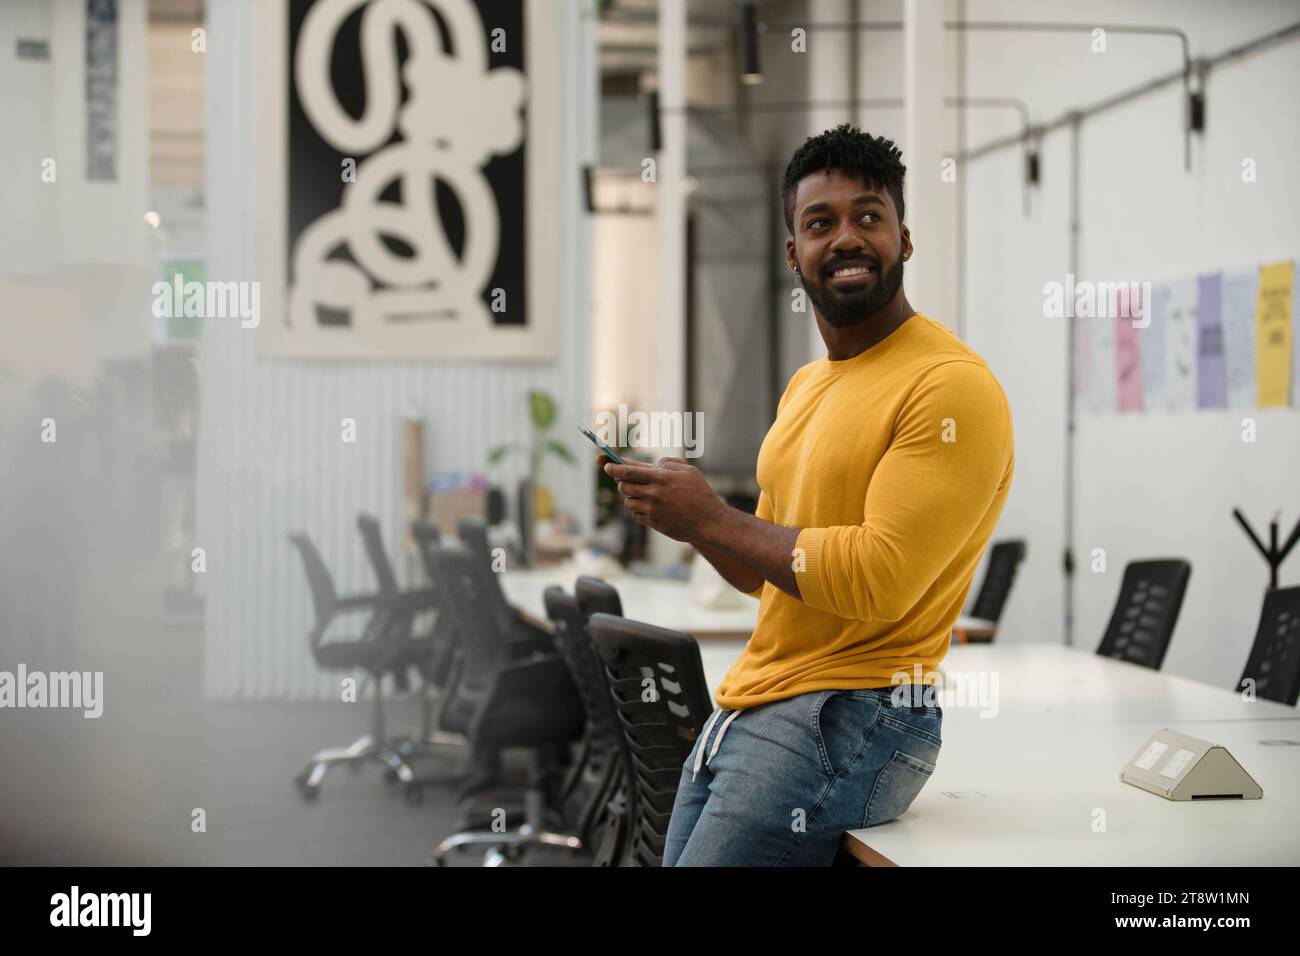 African American man using smart phone while leaning on table Stock Photo